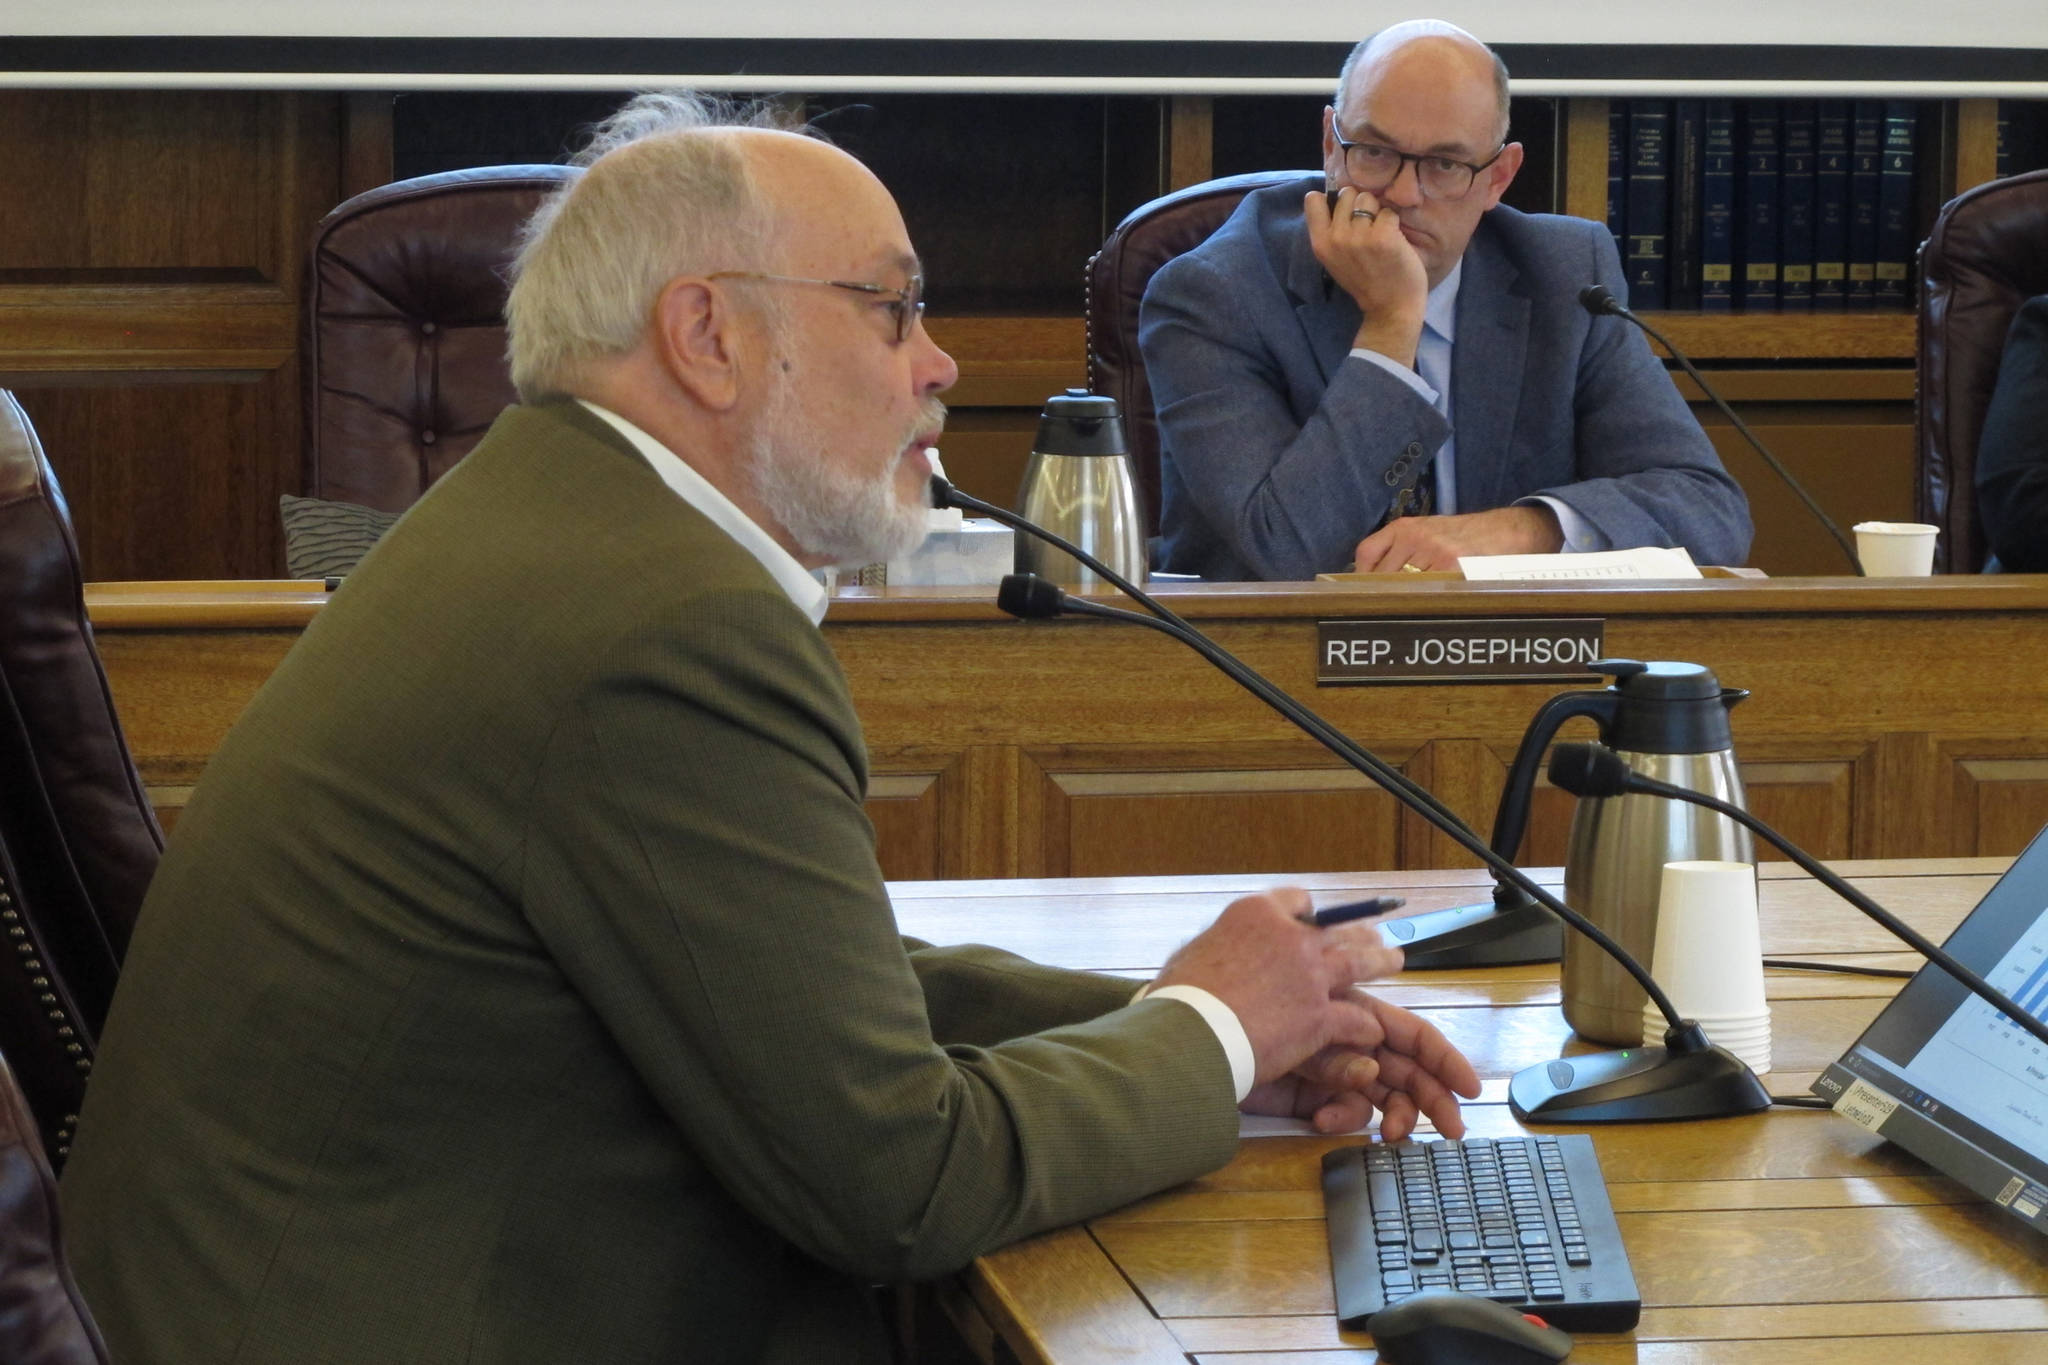 Joe Geldhof, left, testifies before the Alaska House Finance Committee on Thursday, May 23, 2019, in Juneau as Rep. Andy Josephson listens. The committee heard a bill that proposes a full Alaska Permanent Fund Dividend this year but seeks changes to the dividend formula going forward. (Becky Bohrer | Associated Press)